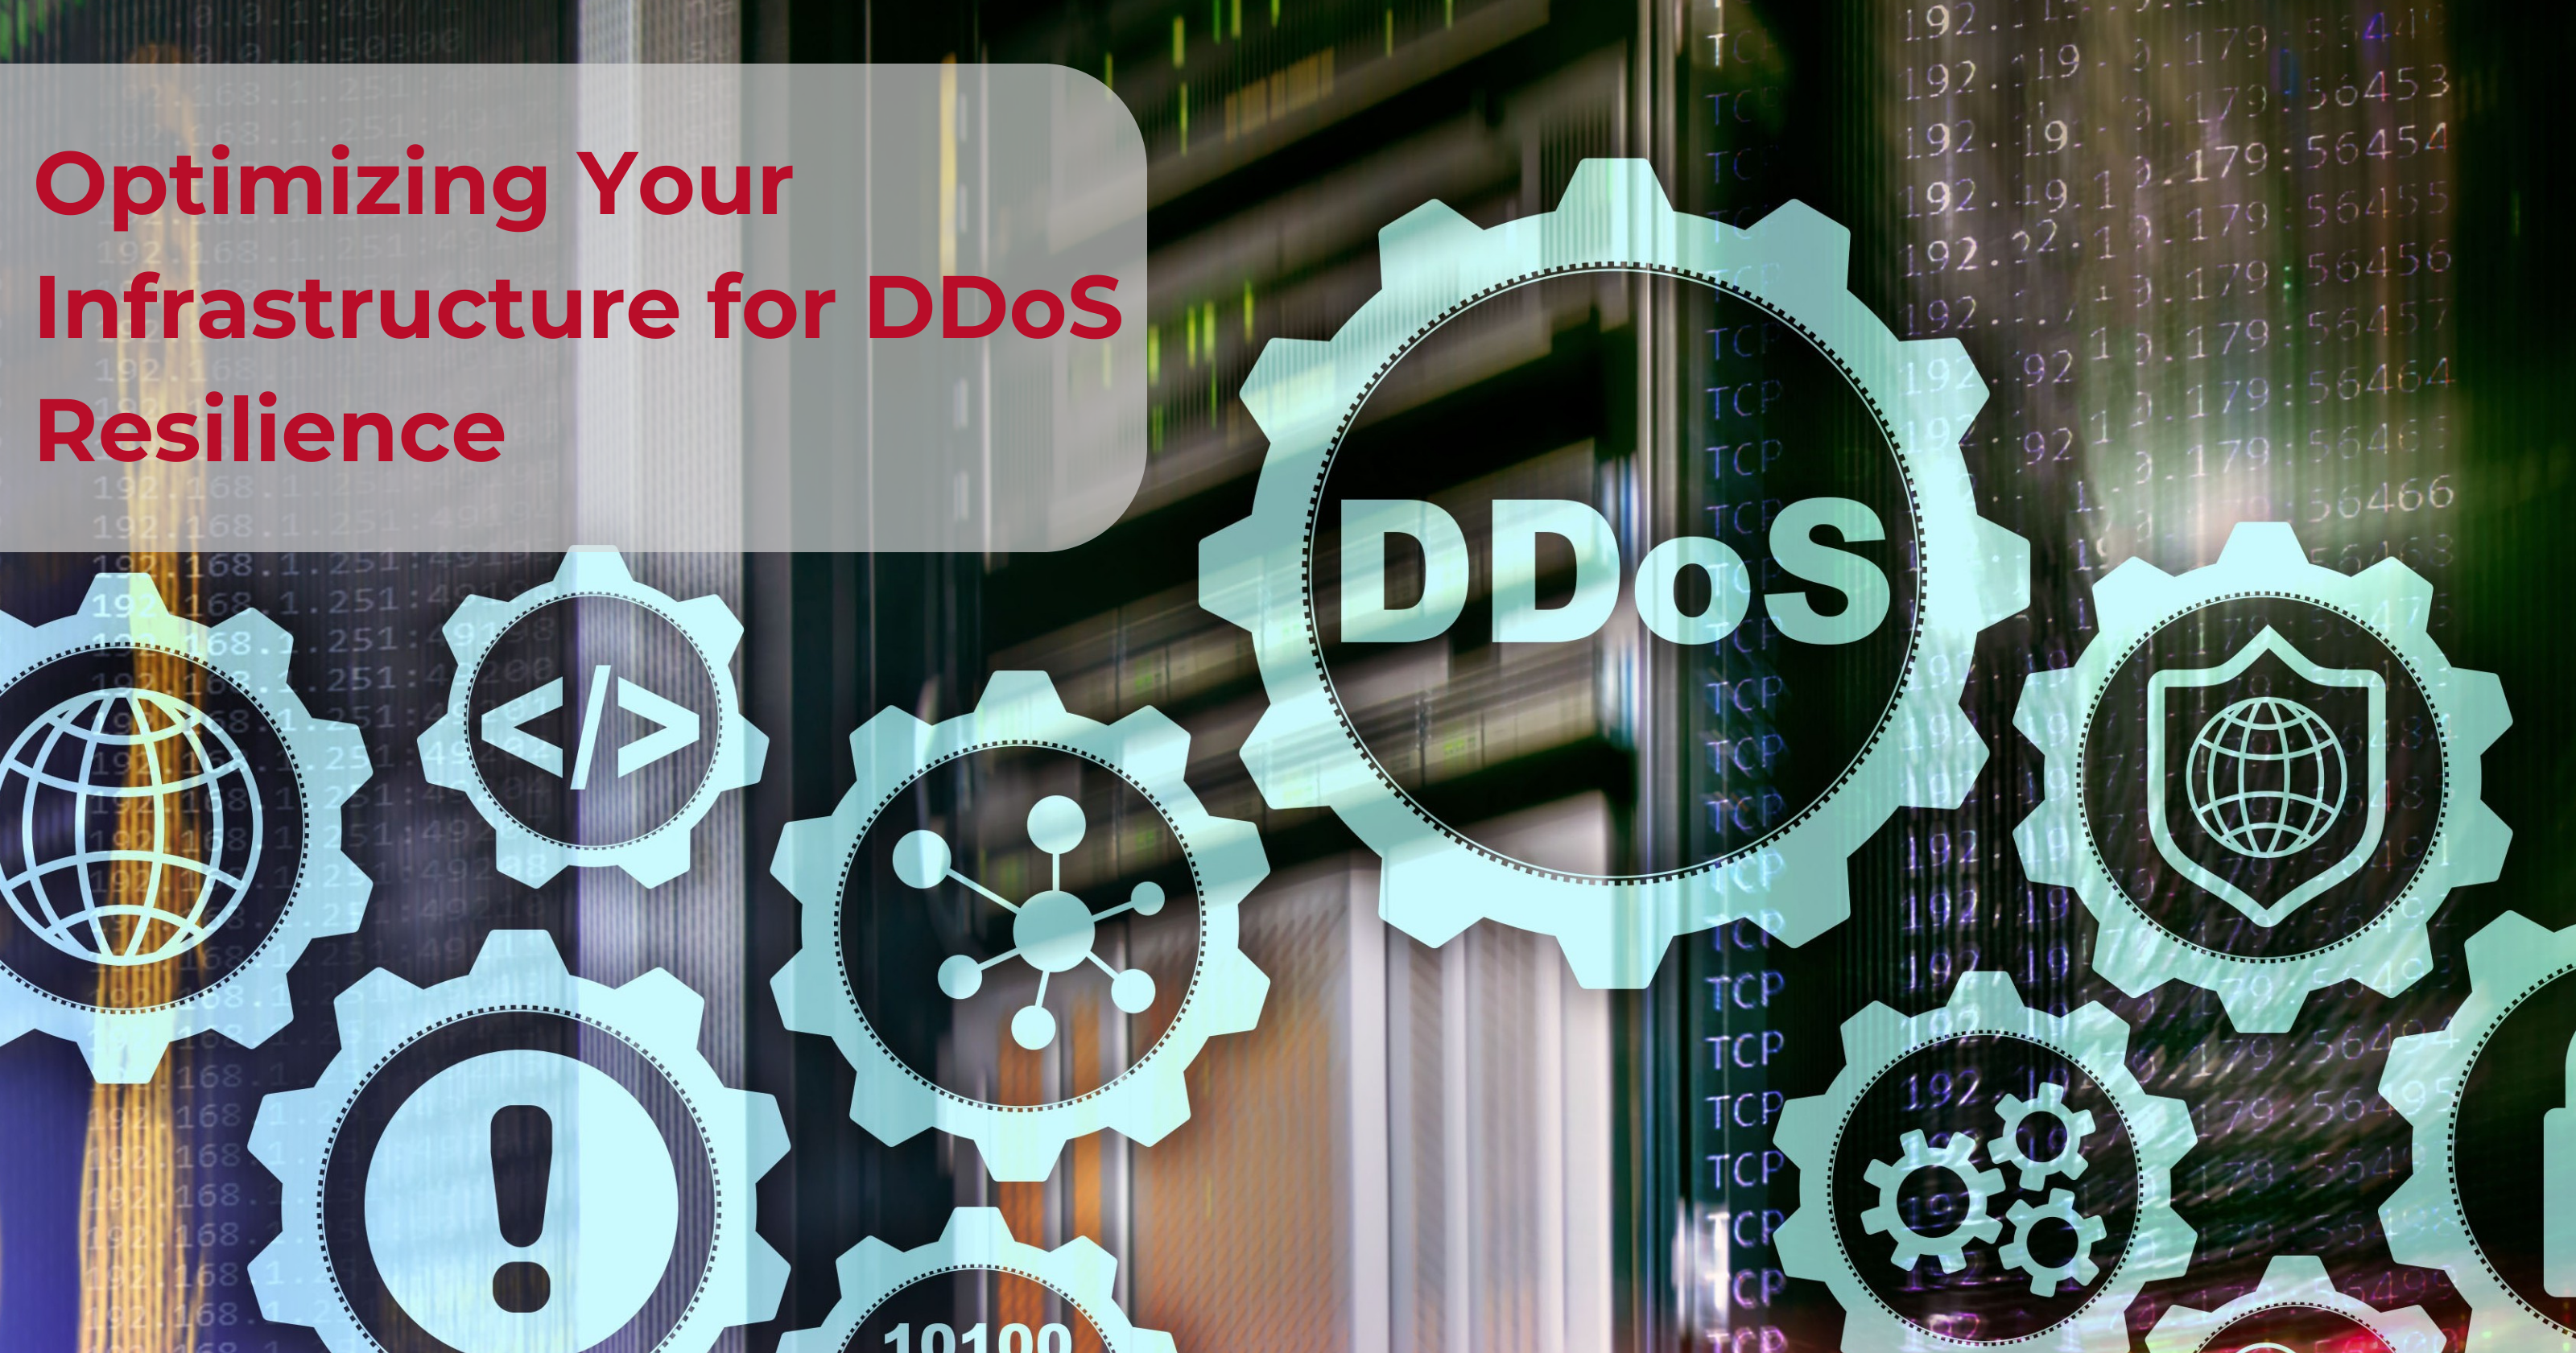 ddos-resilience-infrastructure